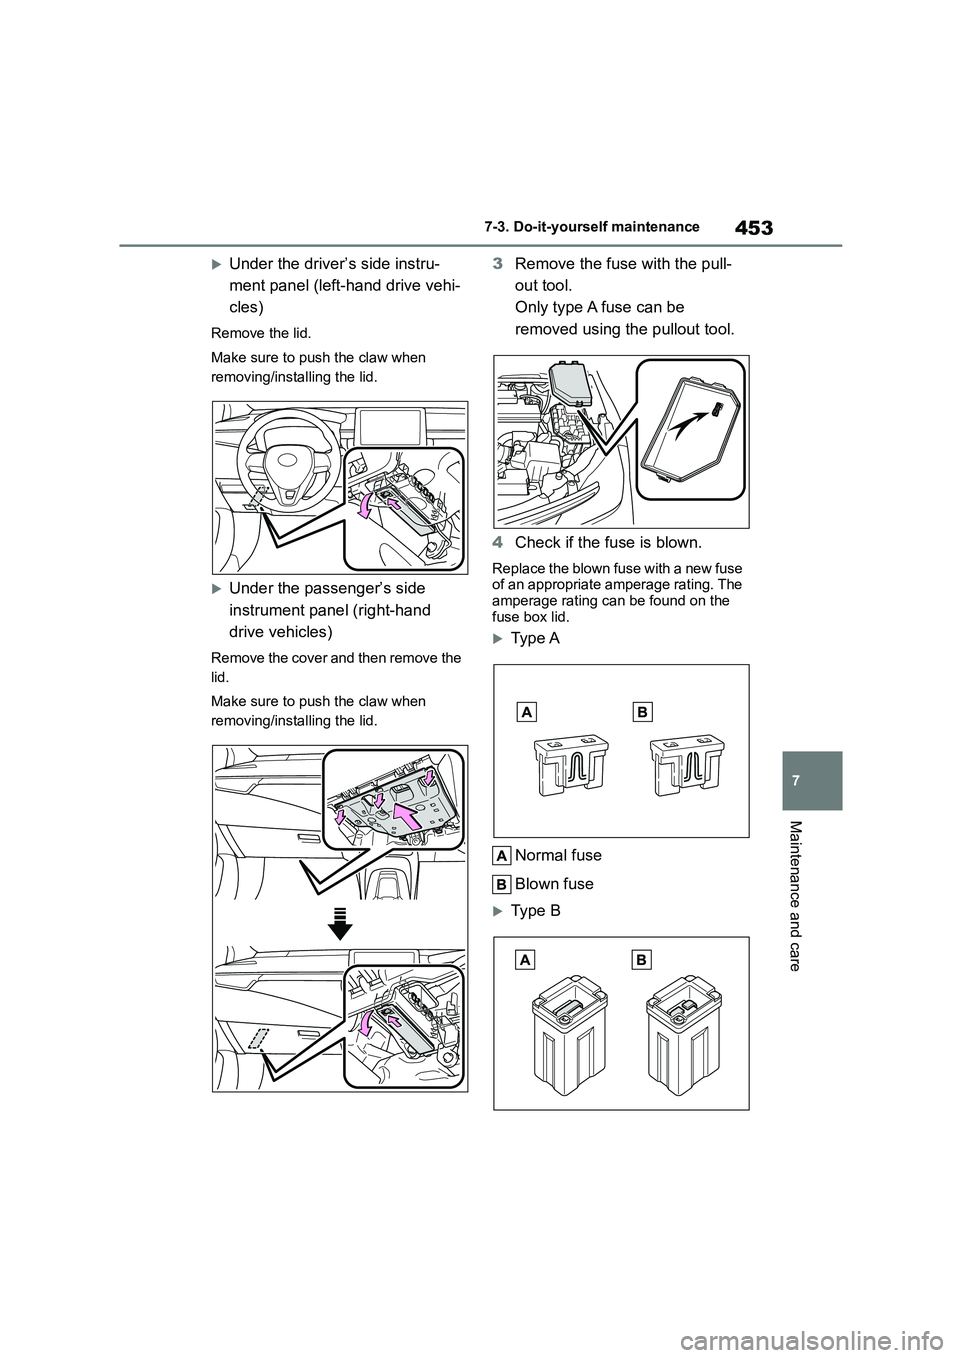 TOYOTA COROLLA 2022  Owners Manual (in English) 453
7 
7-3. Do-it-yourself maintenance
Maintenance and care
Under the driver’s side instru- 
ment panel (left-hand drive vehi-
cles)
Remove the lid. 
Make sure to push the claw when  
removing/in